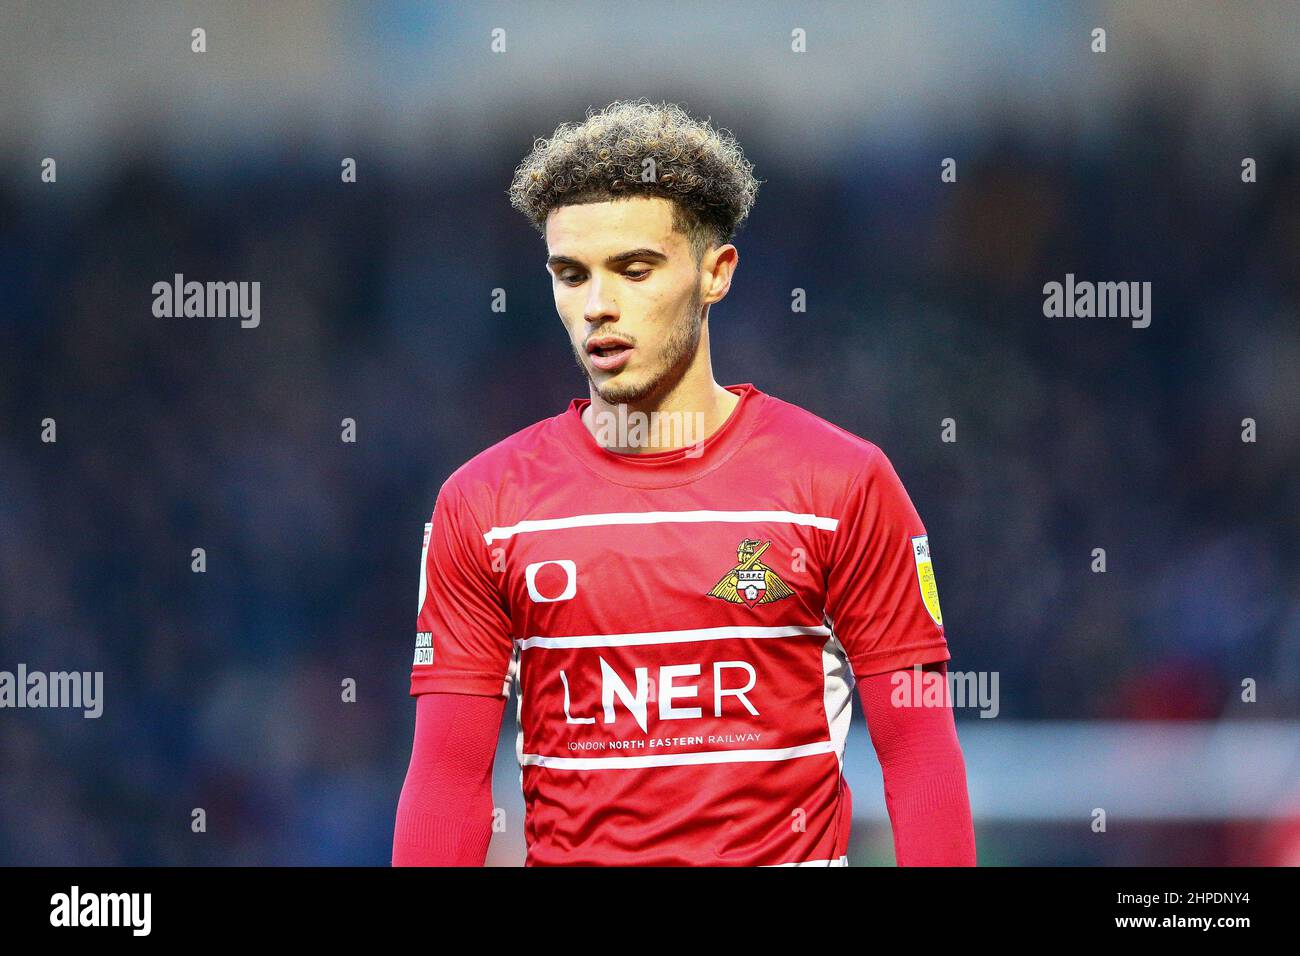 Eco-Power  Stadium Doncaster, England - 19th February 2022  Josh Martin (21) of Doncaster - during the game Doncaster v Sheffield Wednesday, EFL League One 2021/22 at the Eco-Power  Stadium Doncaster, England - 19th February 2022  Credit: Arthur Haigh/WhiteRosePhotos/Alamy Live News Stock Photo